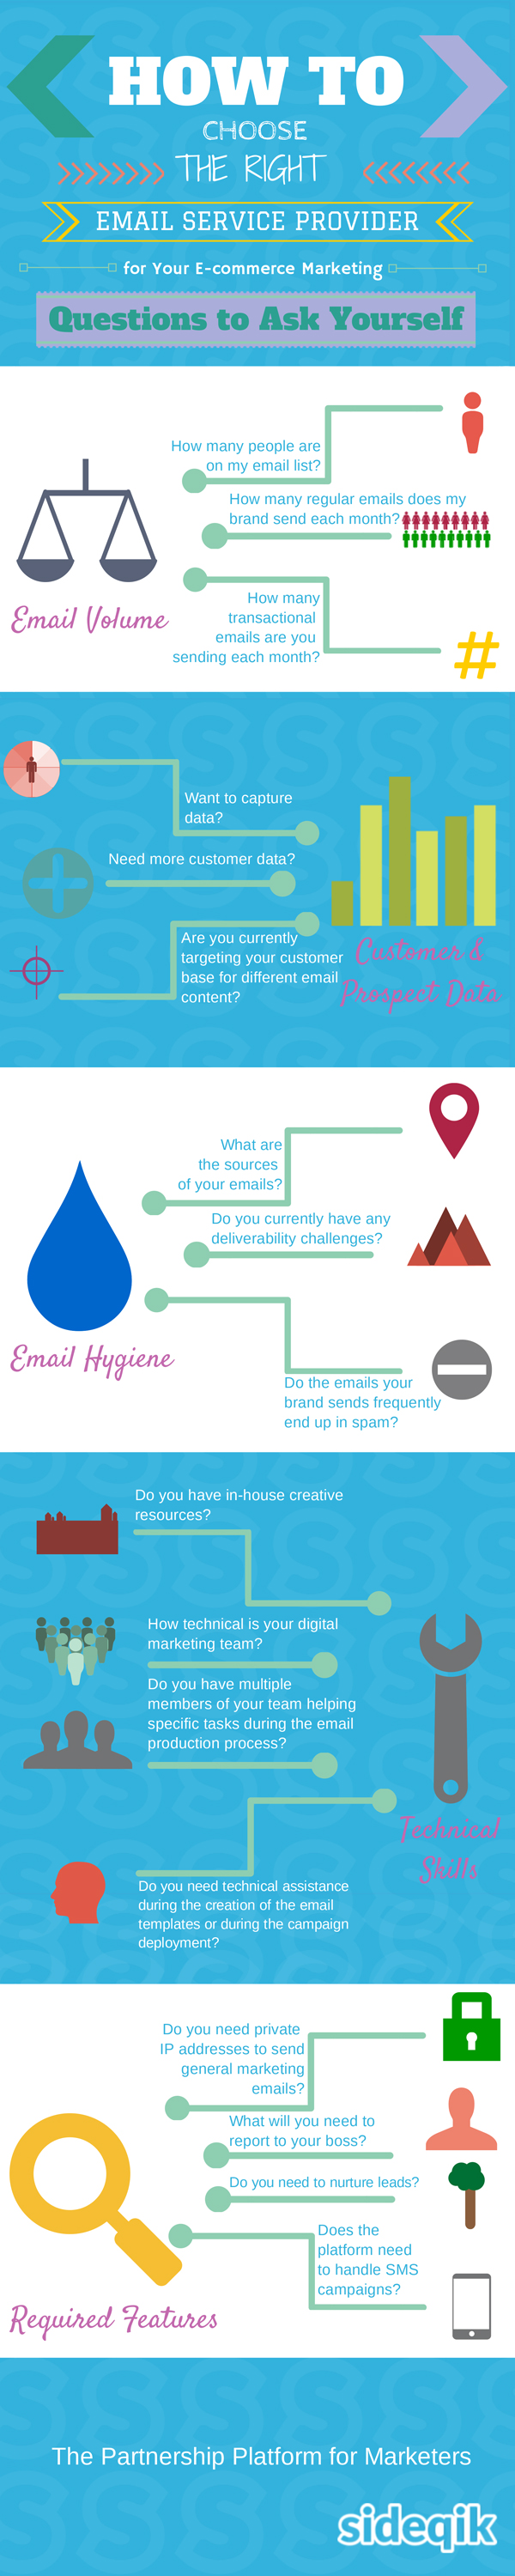 Email Service Provider Infographic